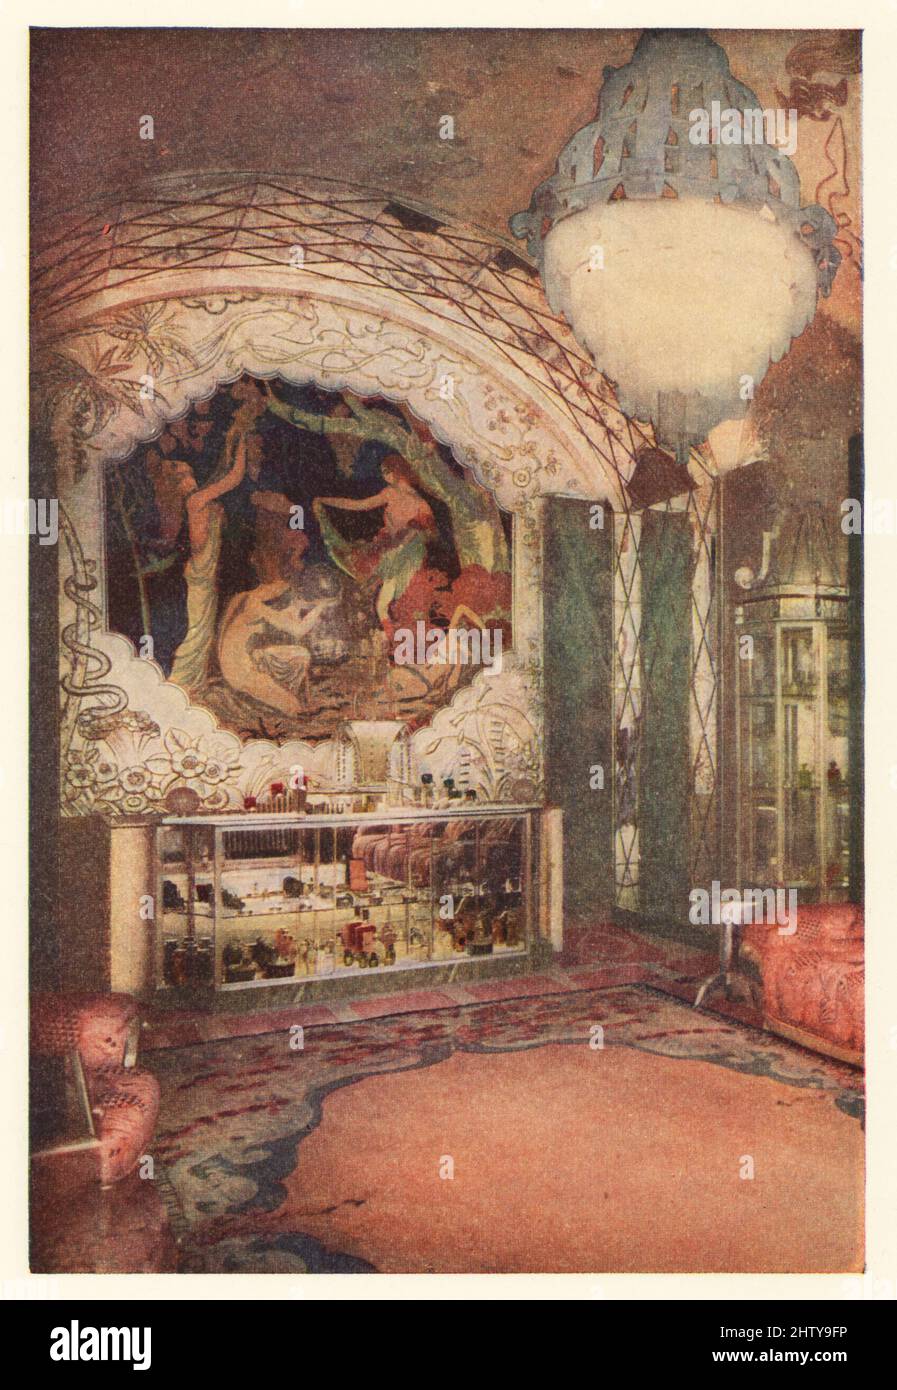 Art Deco interior of the Richard Hudnut shop, rue de la Paix, Paris, 1928. A glass case with perfume bottles under a mural painted by the lacquerist Jean Dunand, pink ceiling and glass chandelier. Smithsonian-process colour print from Richard le Gallienne’s Romance of Perfume, Hudnut, New York, 1928. Stock Photo